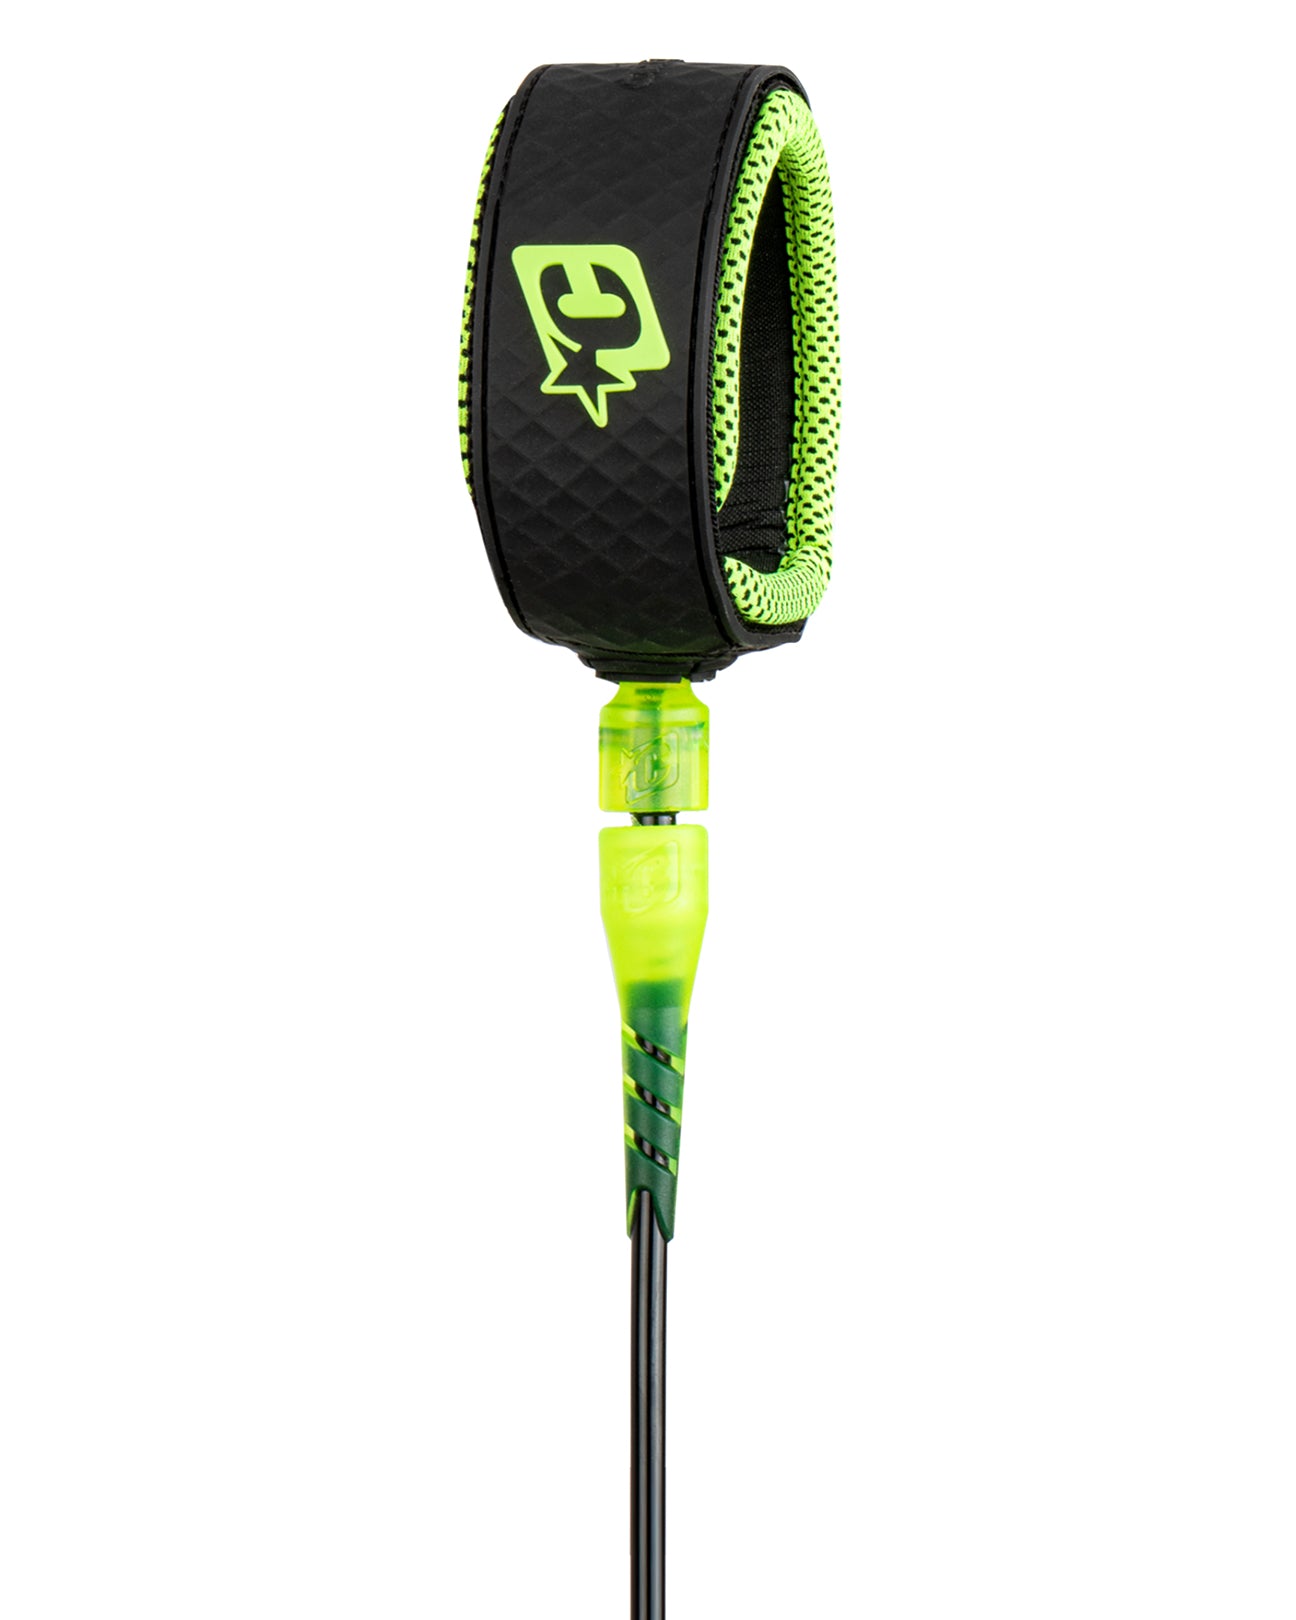 Creatures of Leisure Reliance Pro Leash Black-Lime 6ft0in